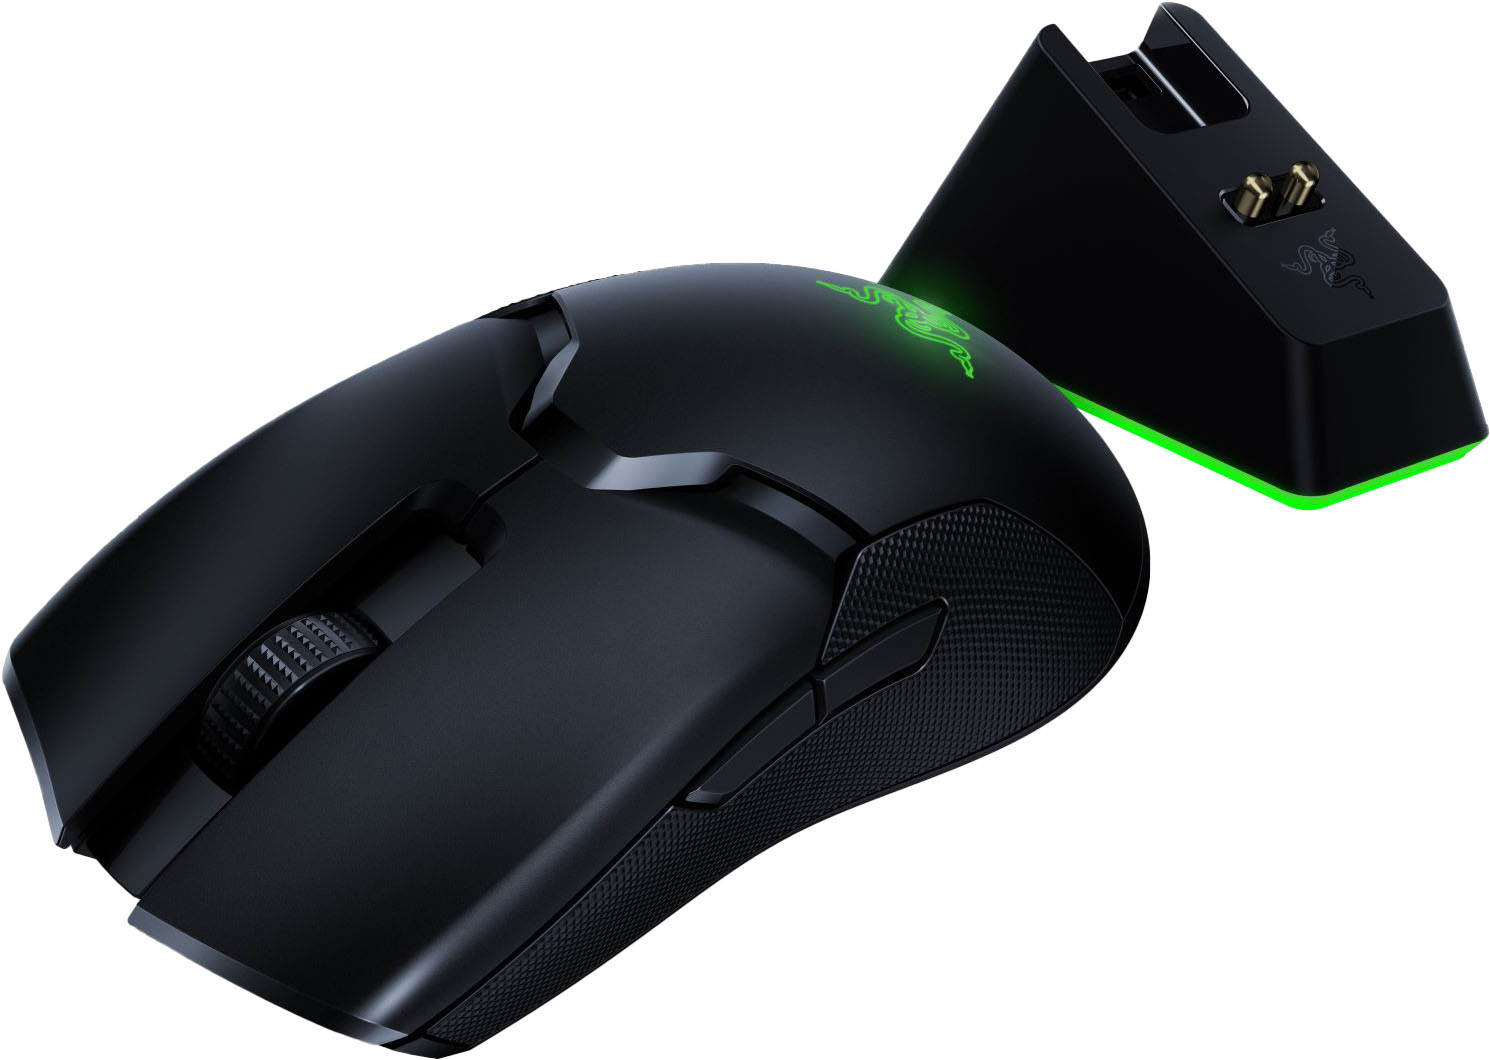 Razer Viper Ultimate Ultralight Wireless Optical Gaming Mouse with 